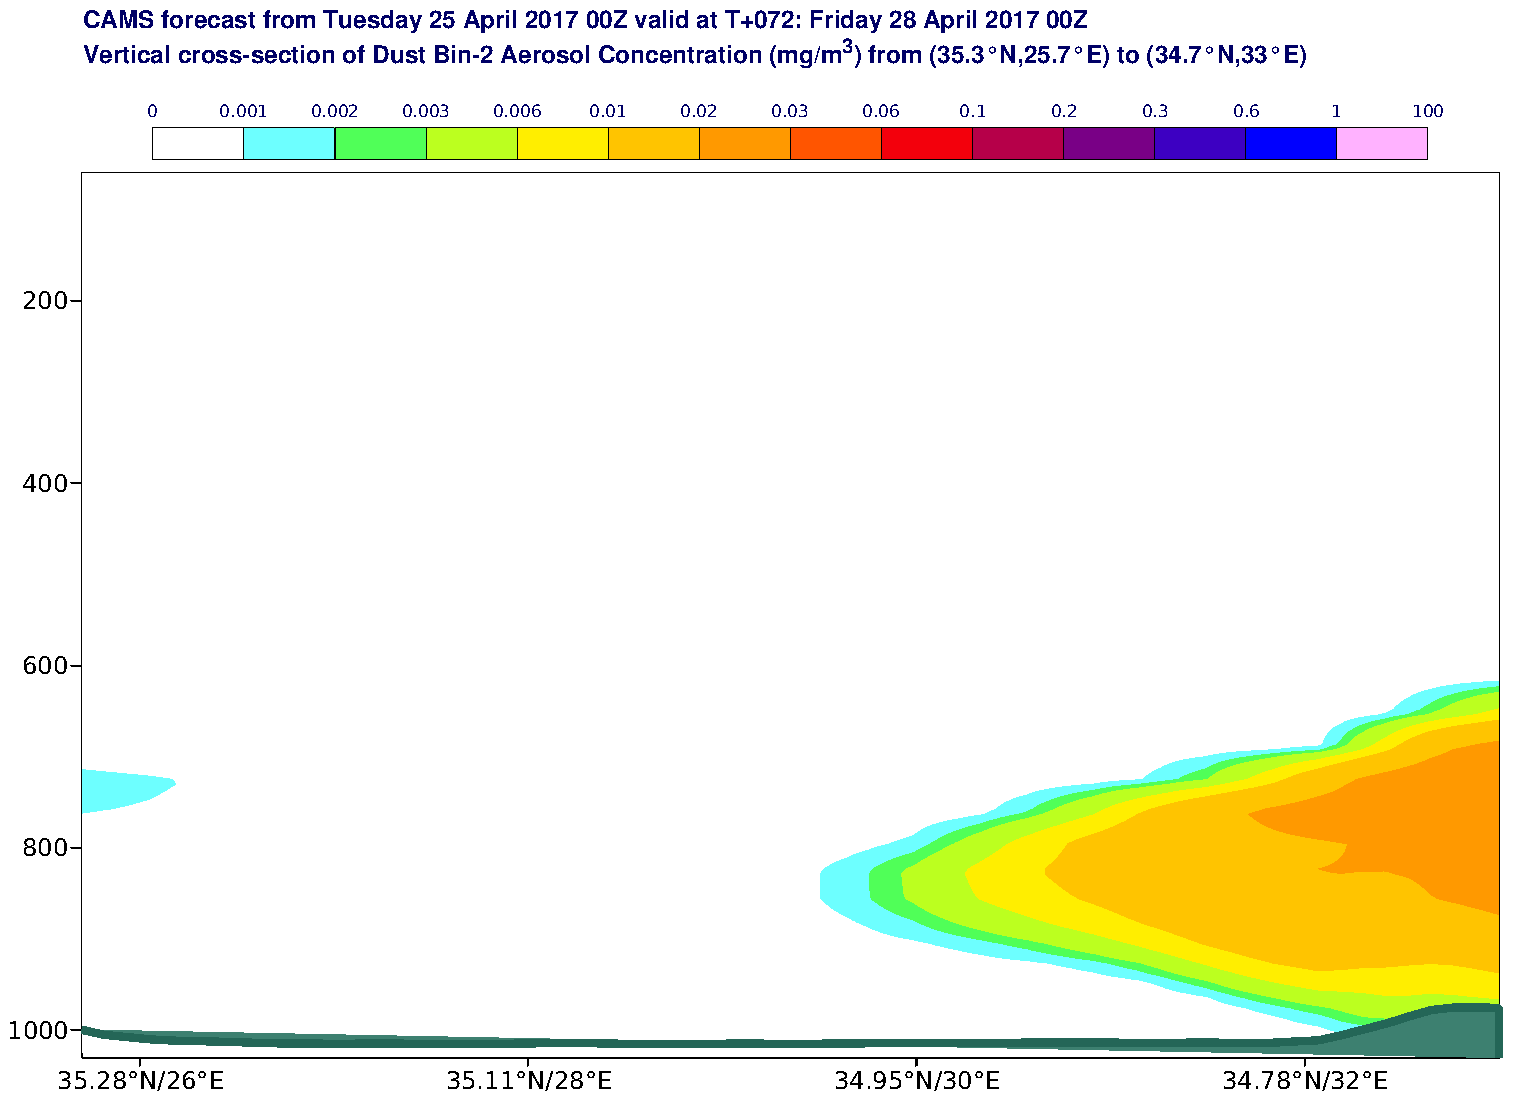 Vertical cross-section of Dust Bin-2 Aerosol Concentration (mg/m3) valid at T72 - 2017-04-28 00:00